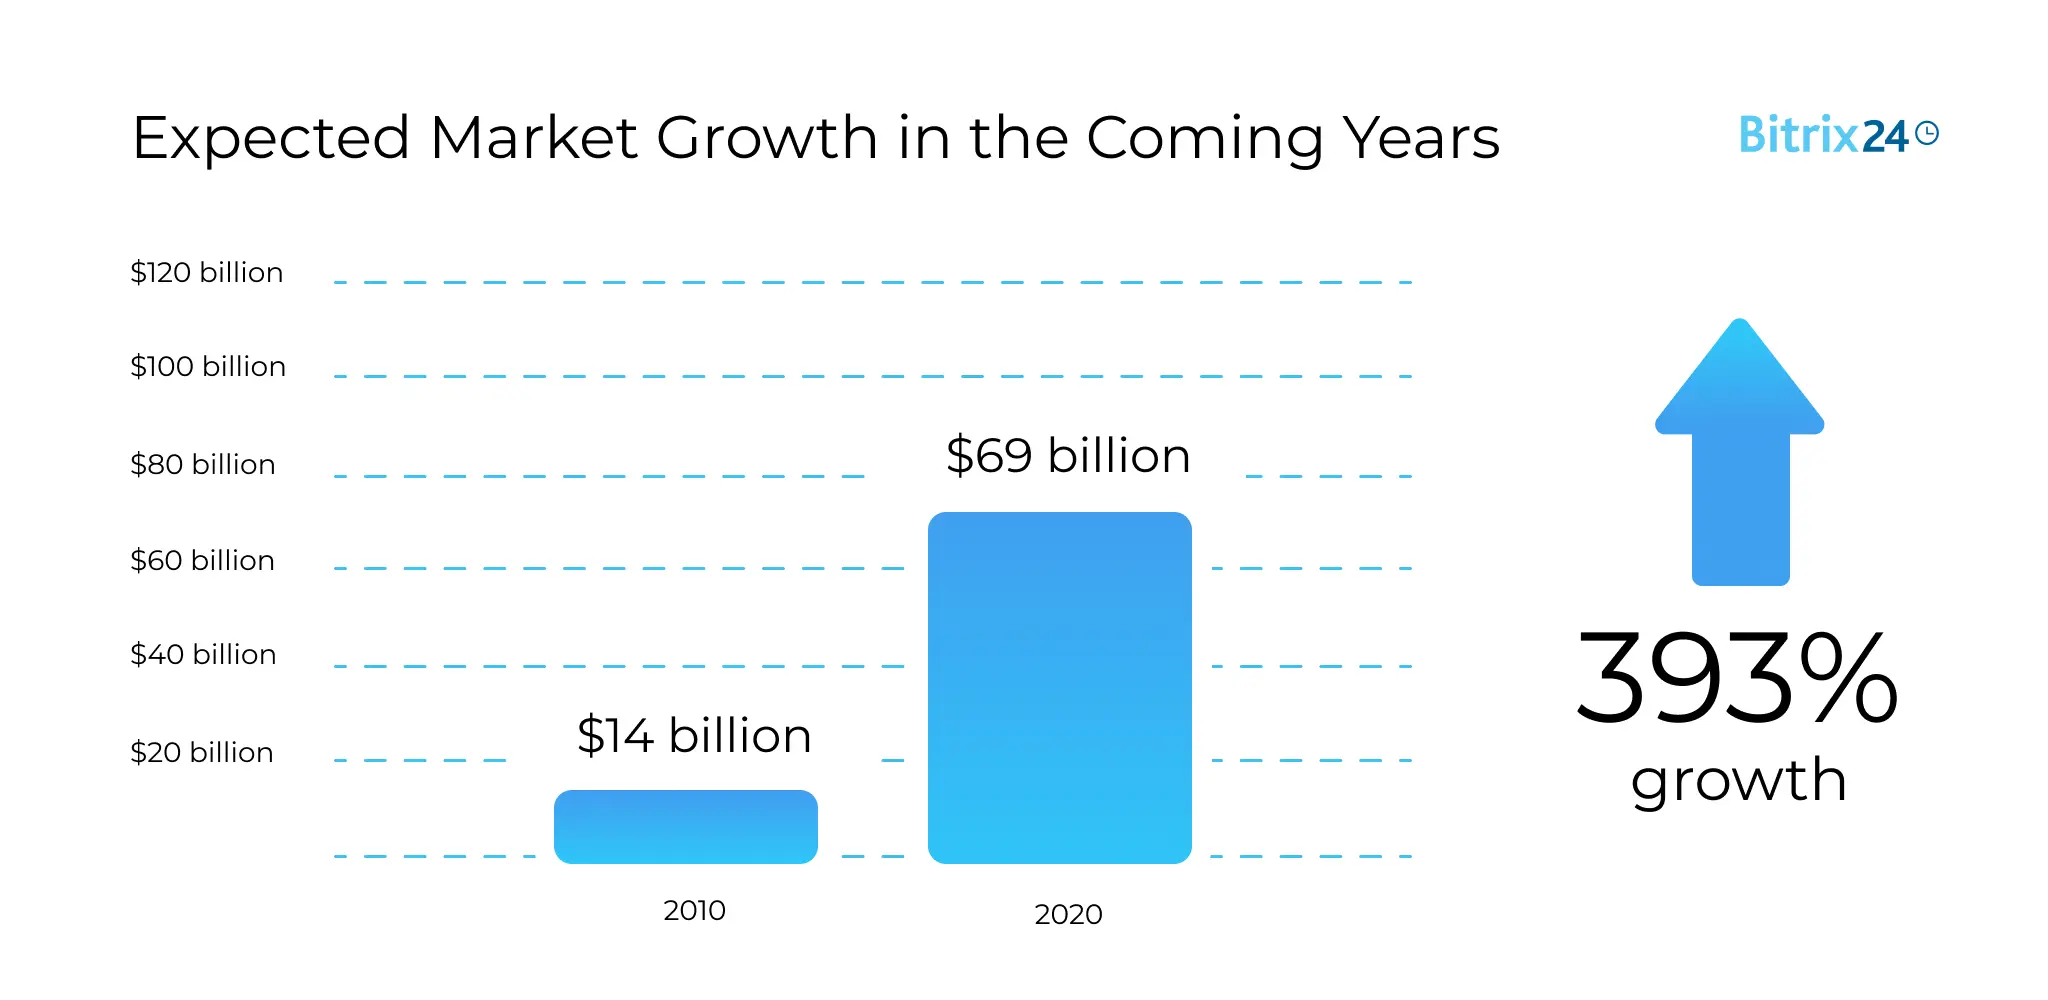 Expected market growth in the coming years